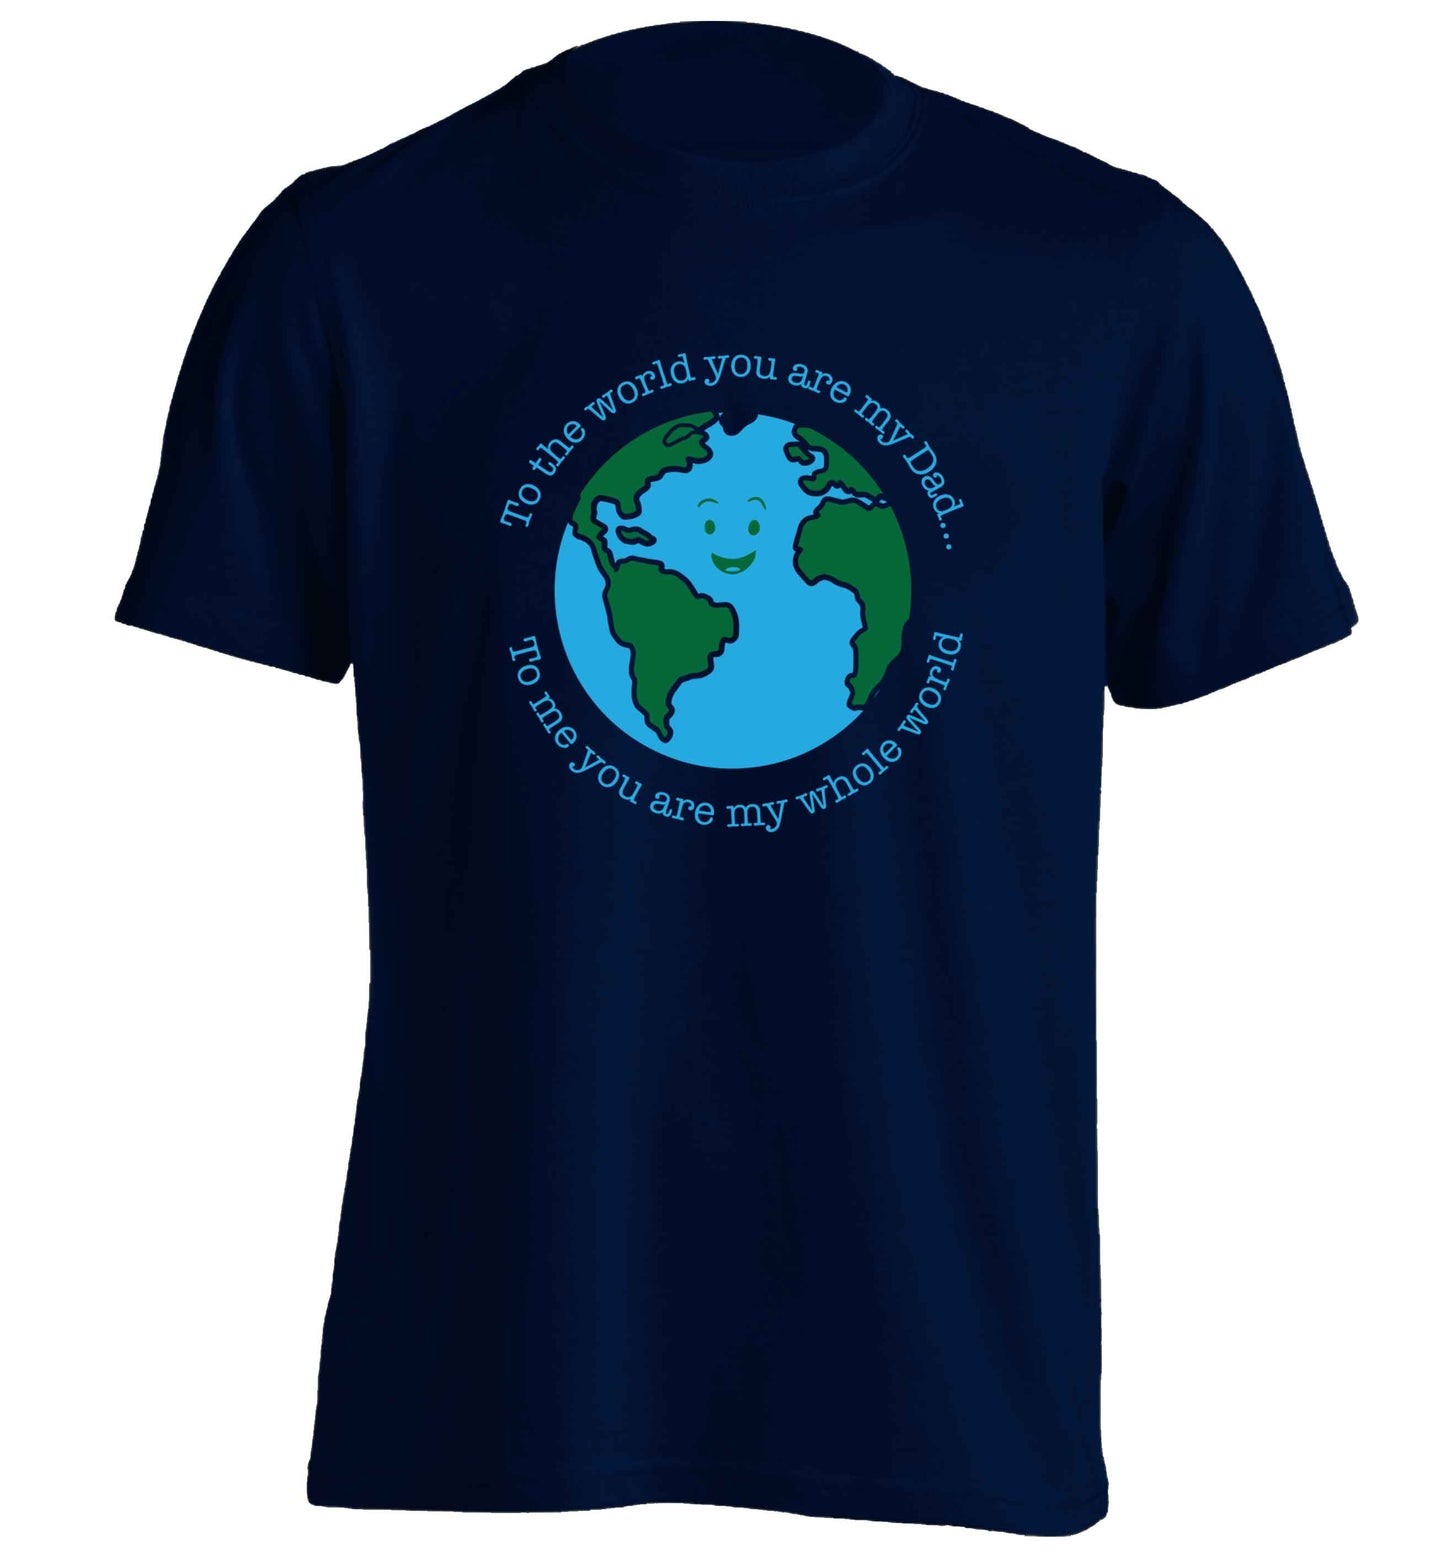 To the world you are my dad, to me you are my whole world adults unisex navy Tshirt 2XL